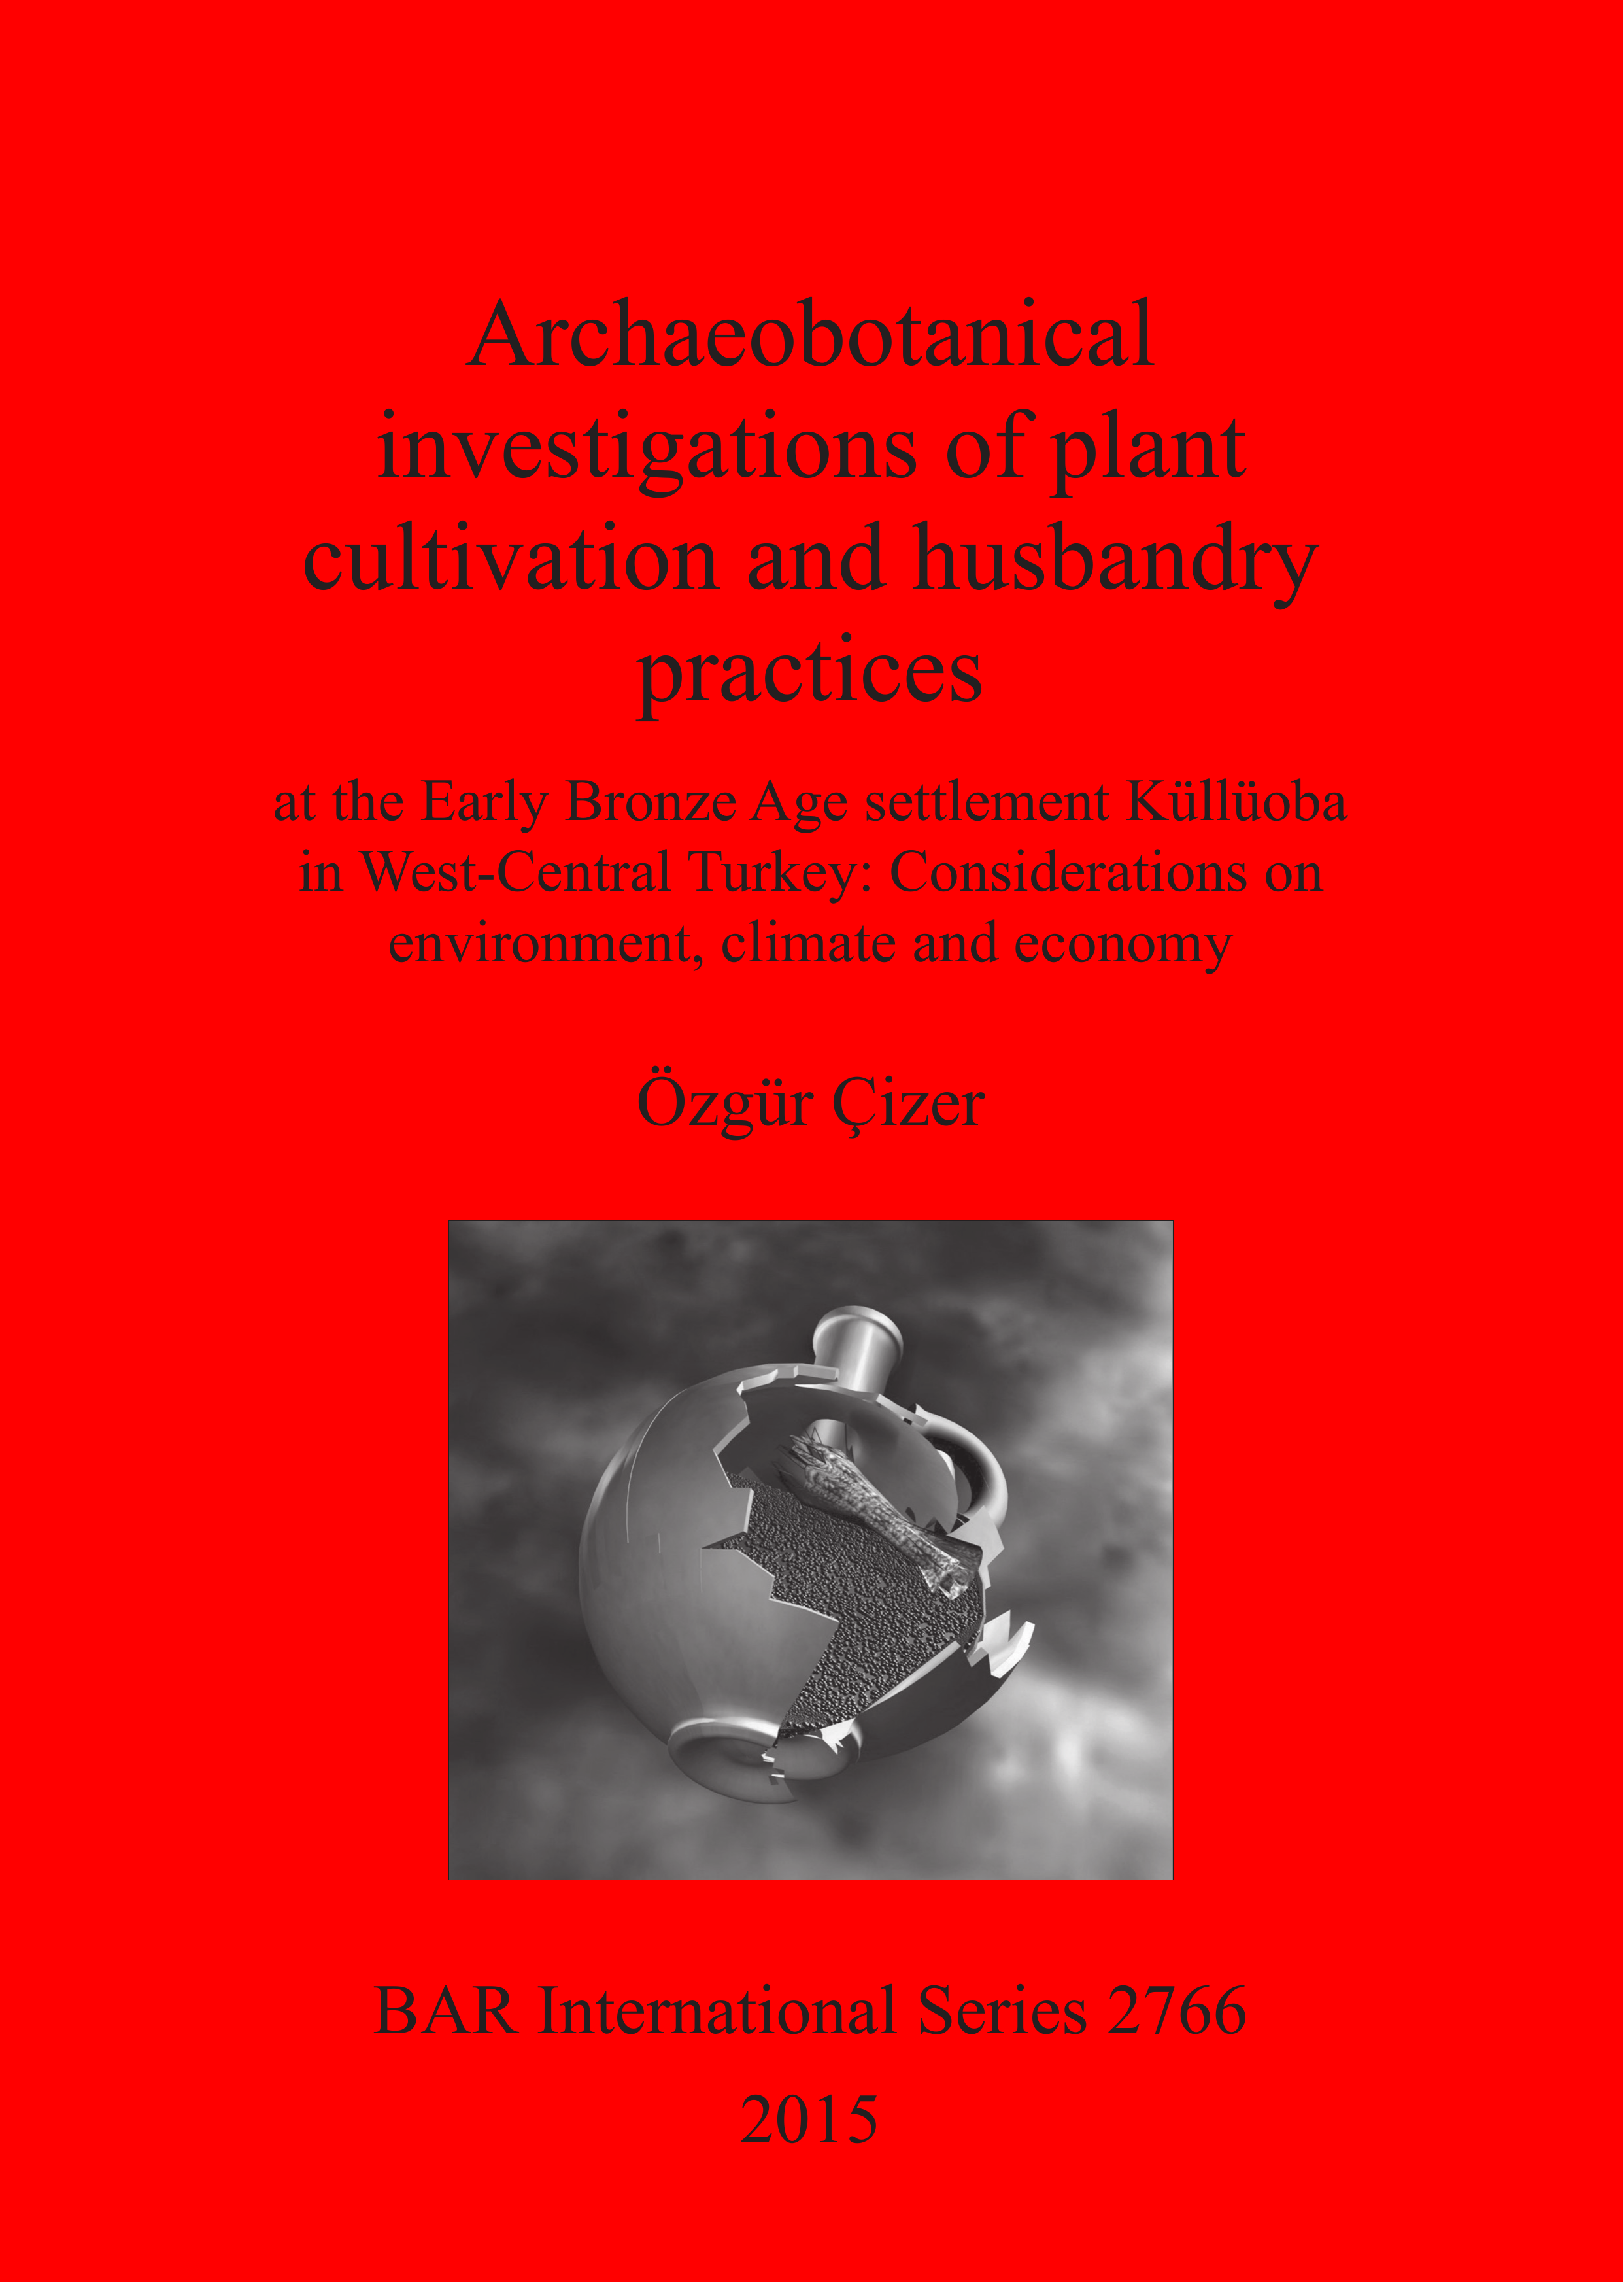 Archaeobotanical investigations of plant cultivation and husbandry  practices: at the Early Bronze Age settlement Küllüoba in West-Central  Turkey: Considerations on environment, climate and economy